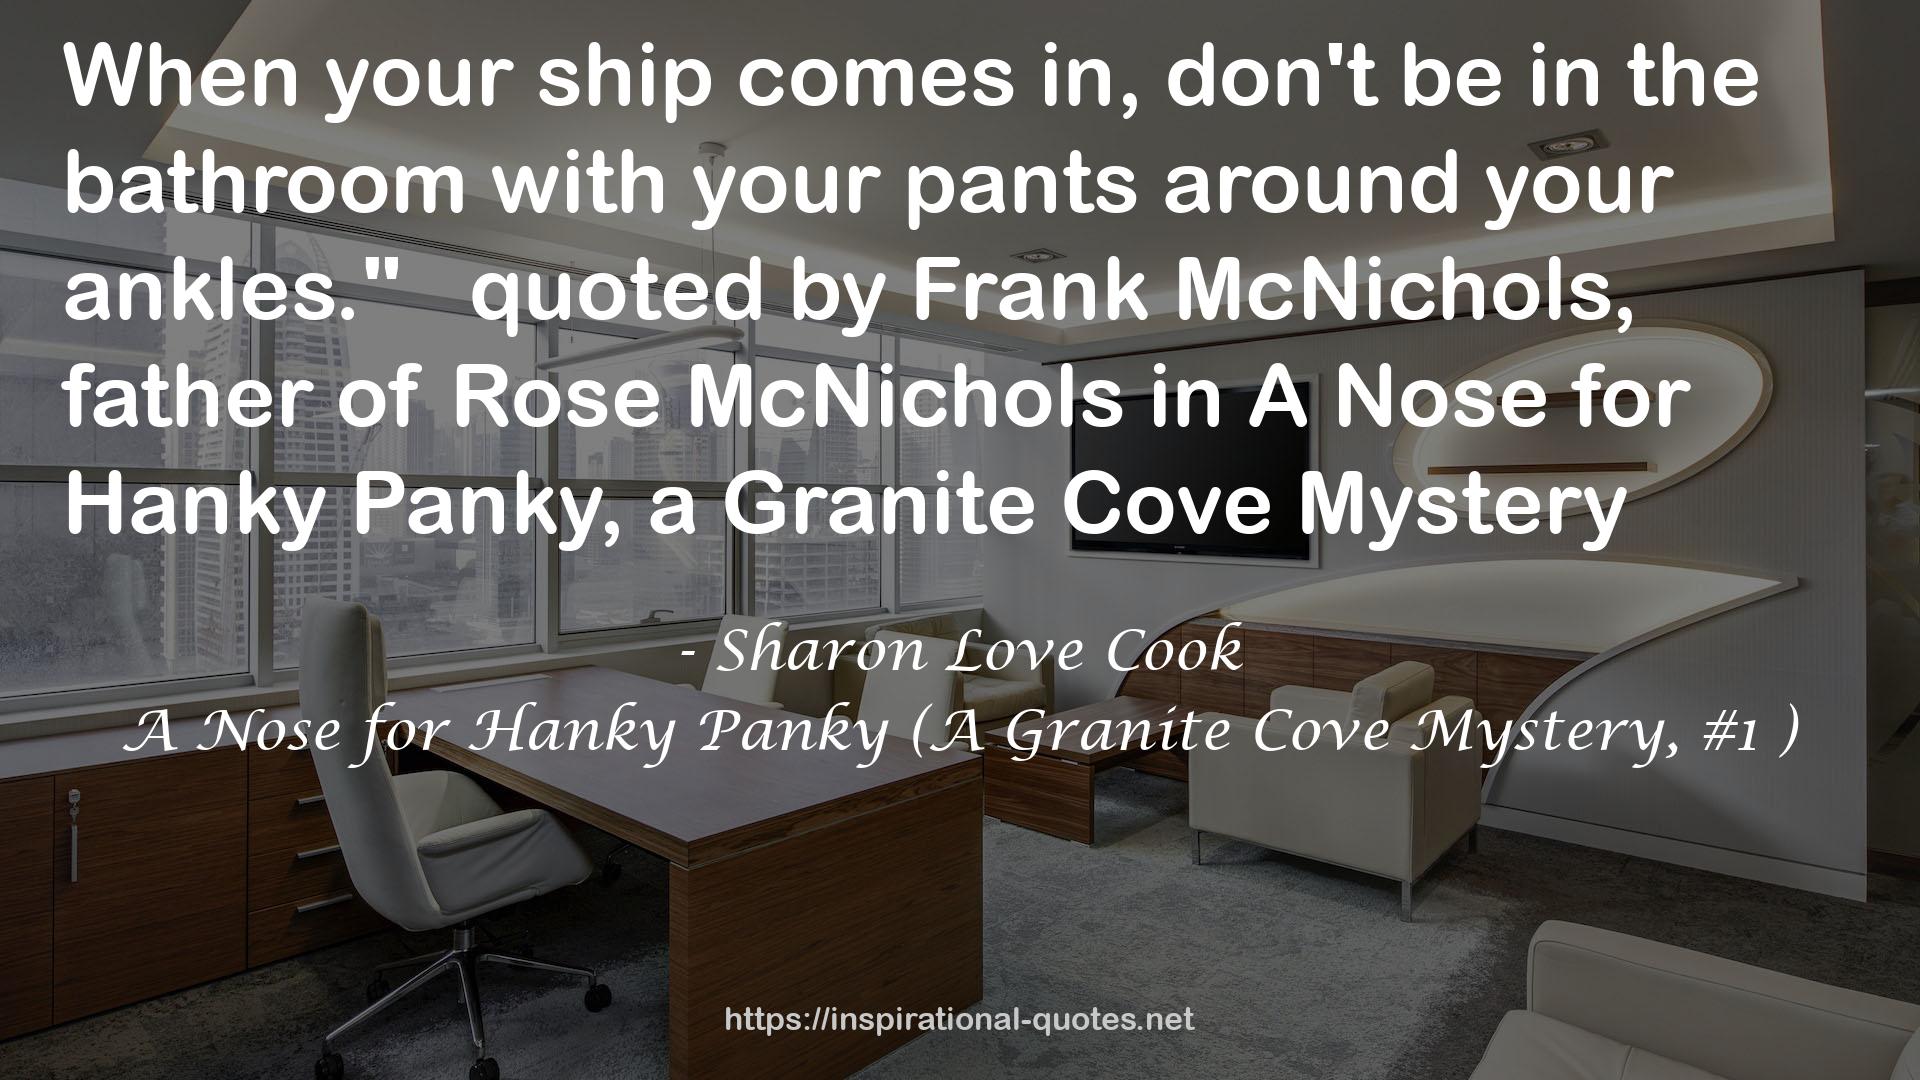 A Nose for Hanky Panky (A Granite Cove Mystery, #1 ) QUOTES